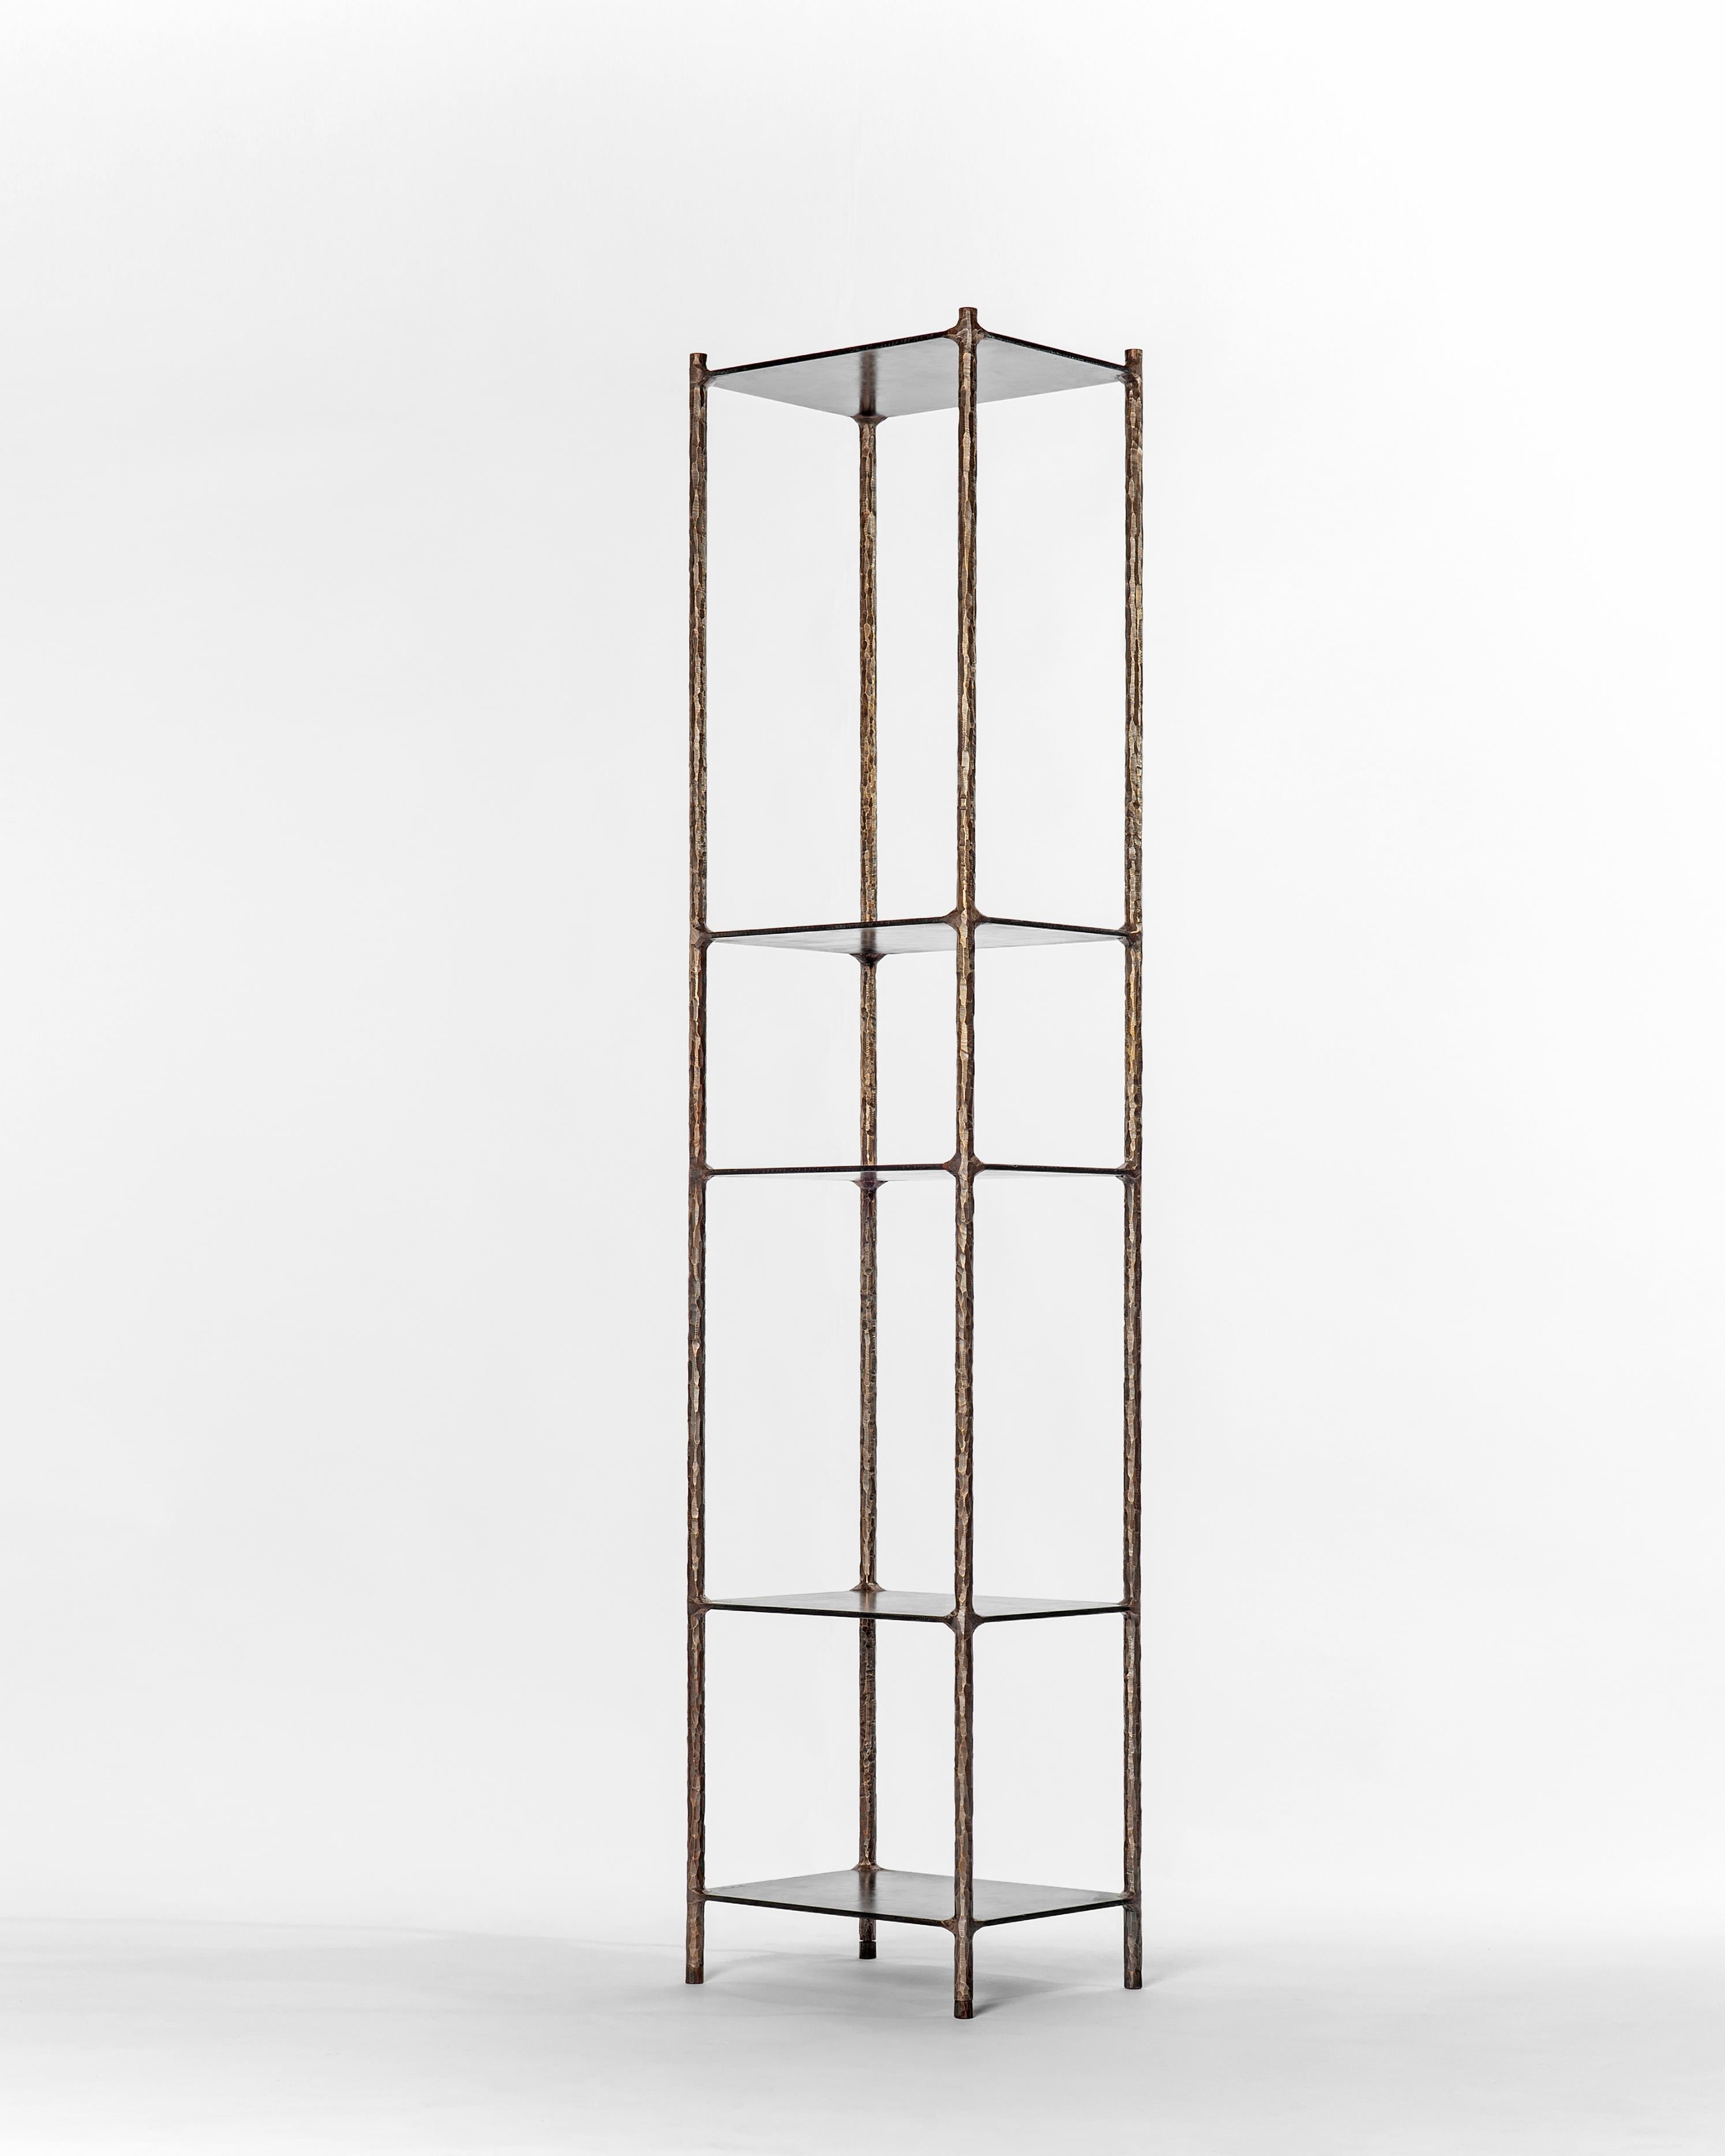 Steel and Brass Bookshelves by Lukasz Friedrich.
Signed and dated.
Measures: D 33 x W 43 x H 191 cm.
Finish: Patinated solid brass, blackened steel shelves.